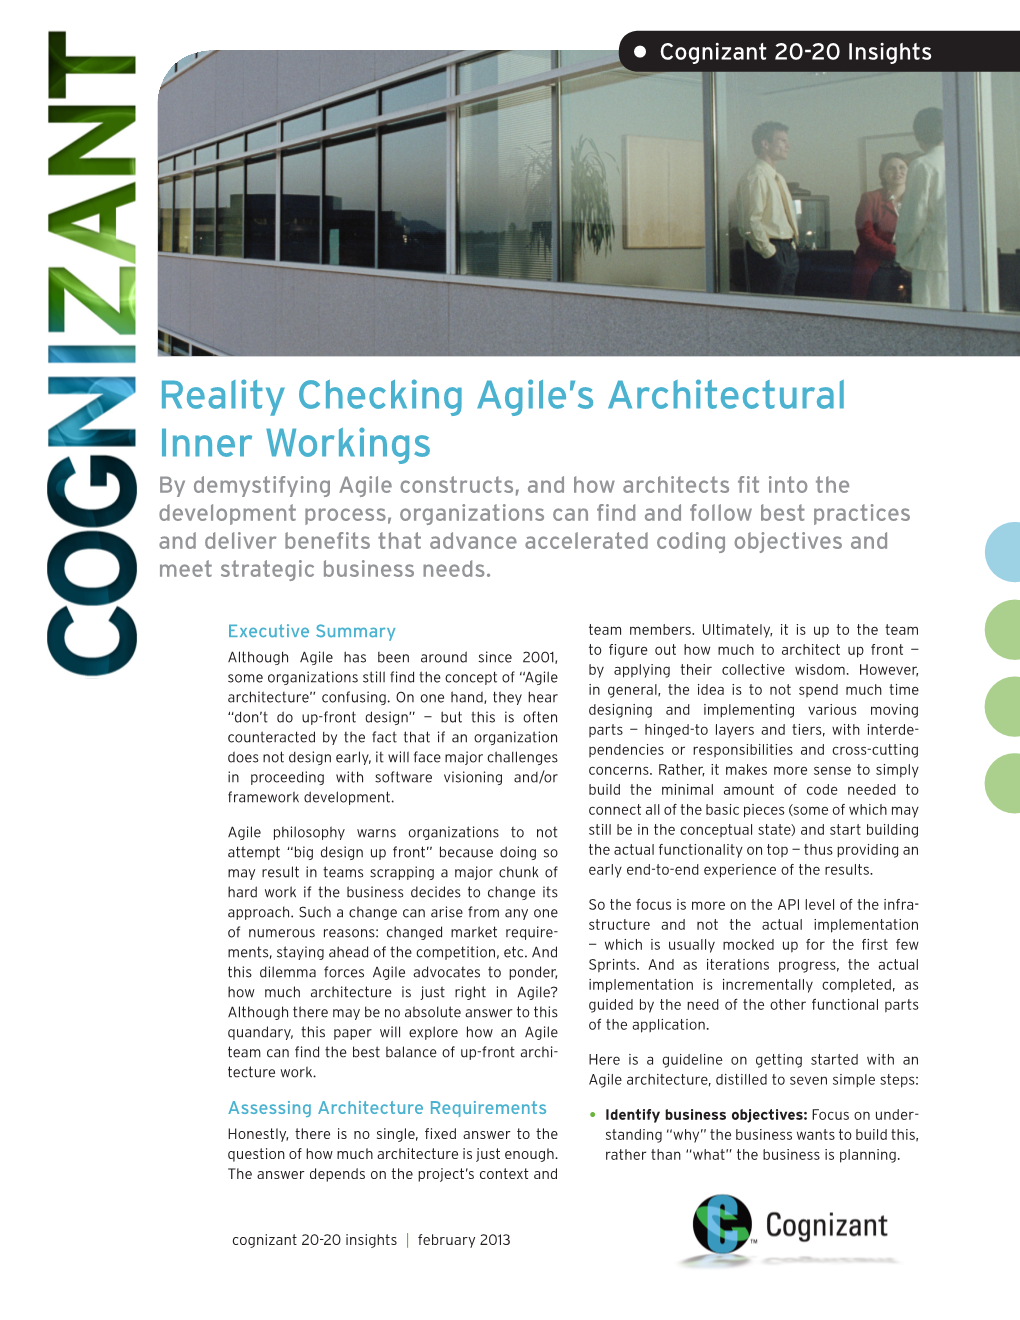 Reality Checking Agile's Architectural Inner Workings